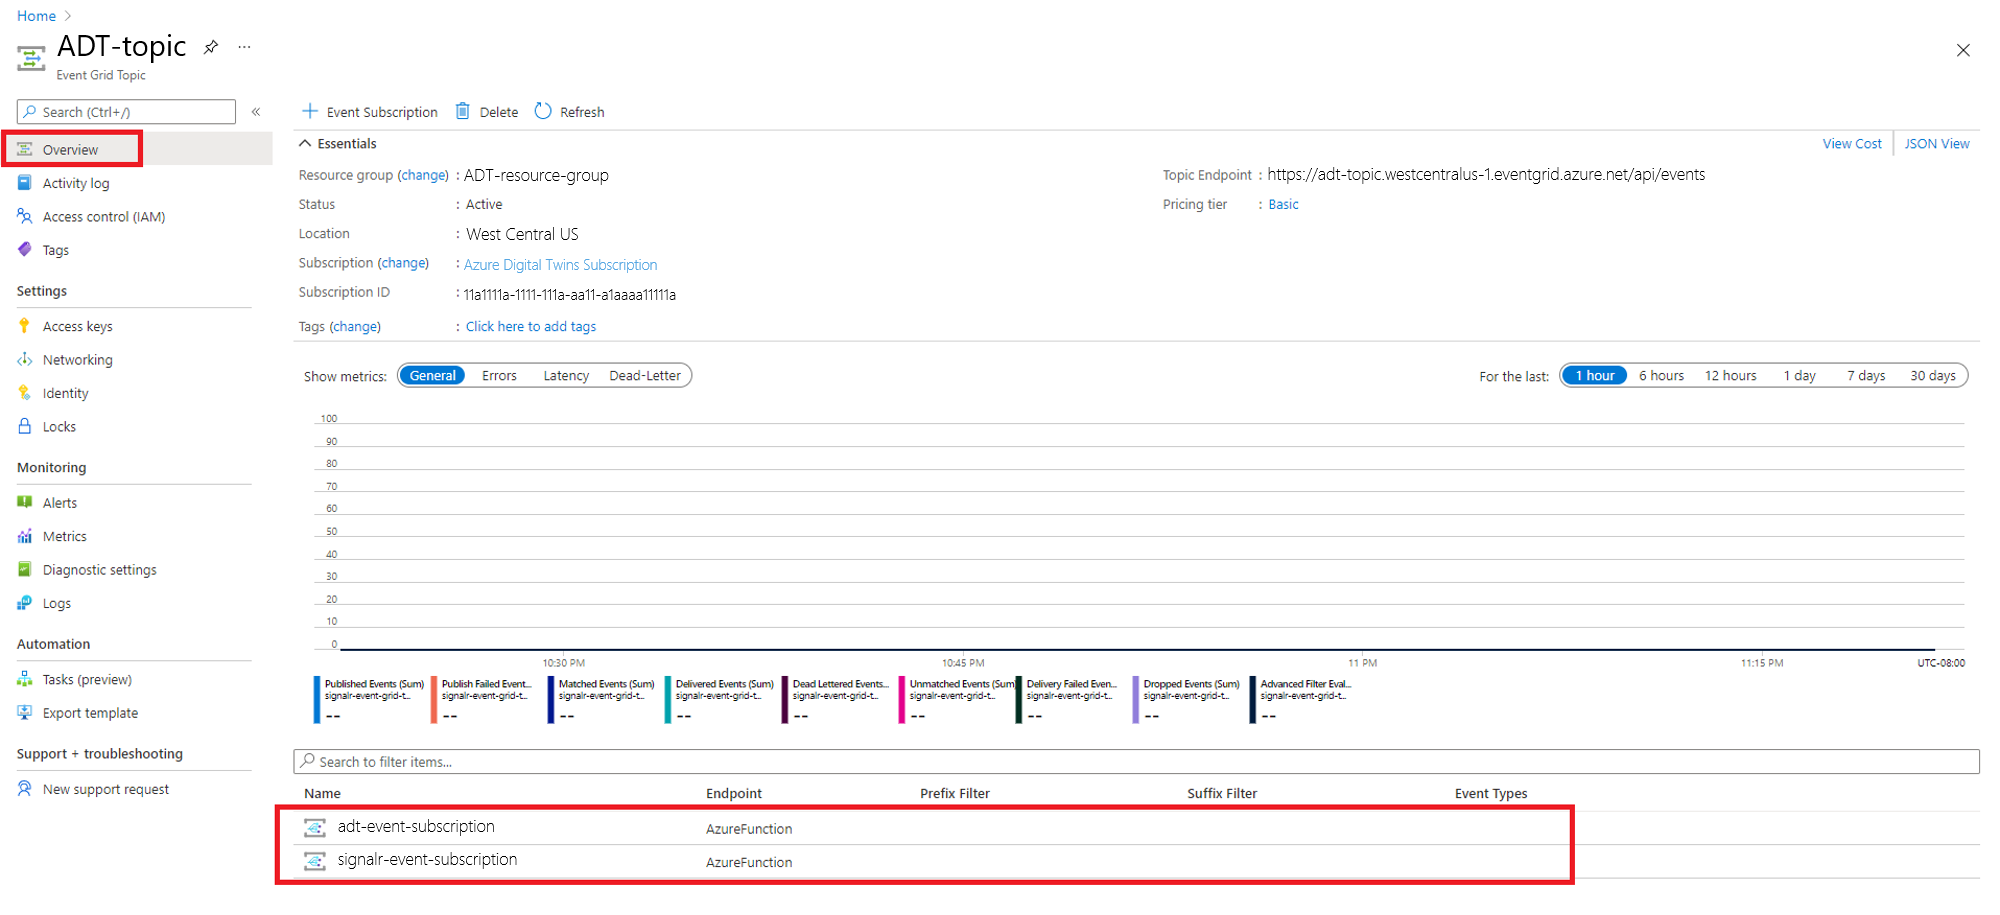 Screenshot of the Azure portal showing two event subscriptions in the Event Grid topic page.